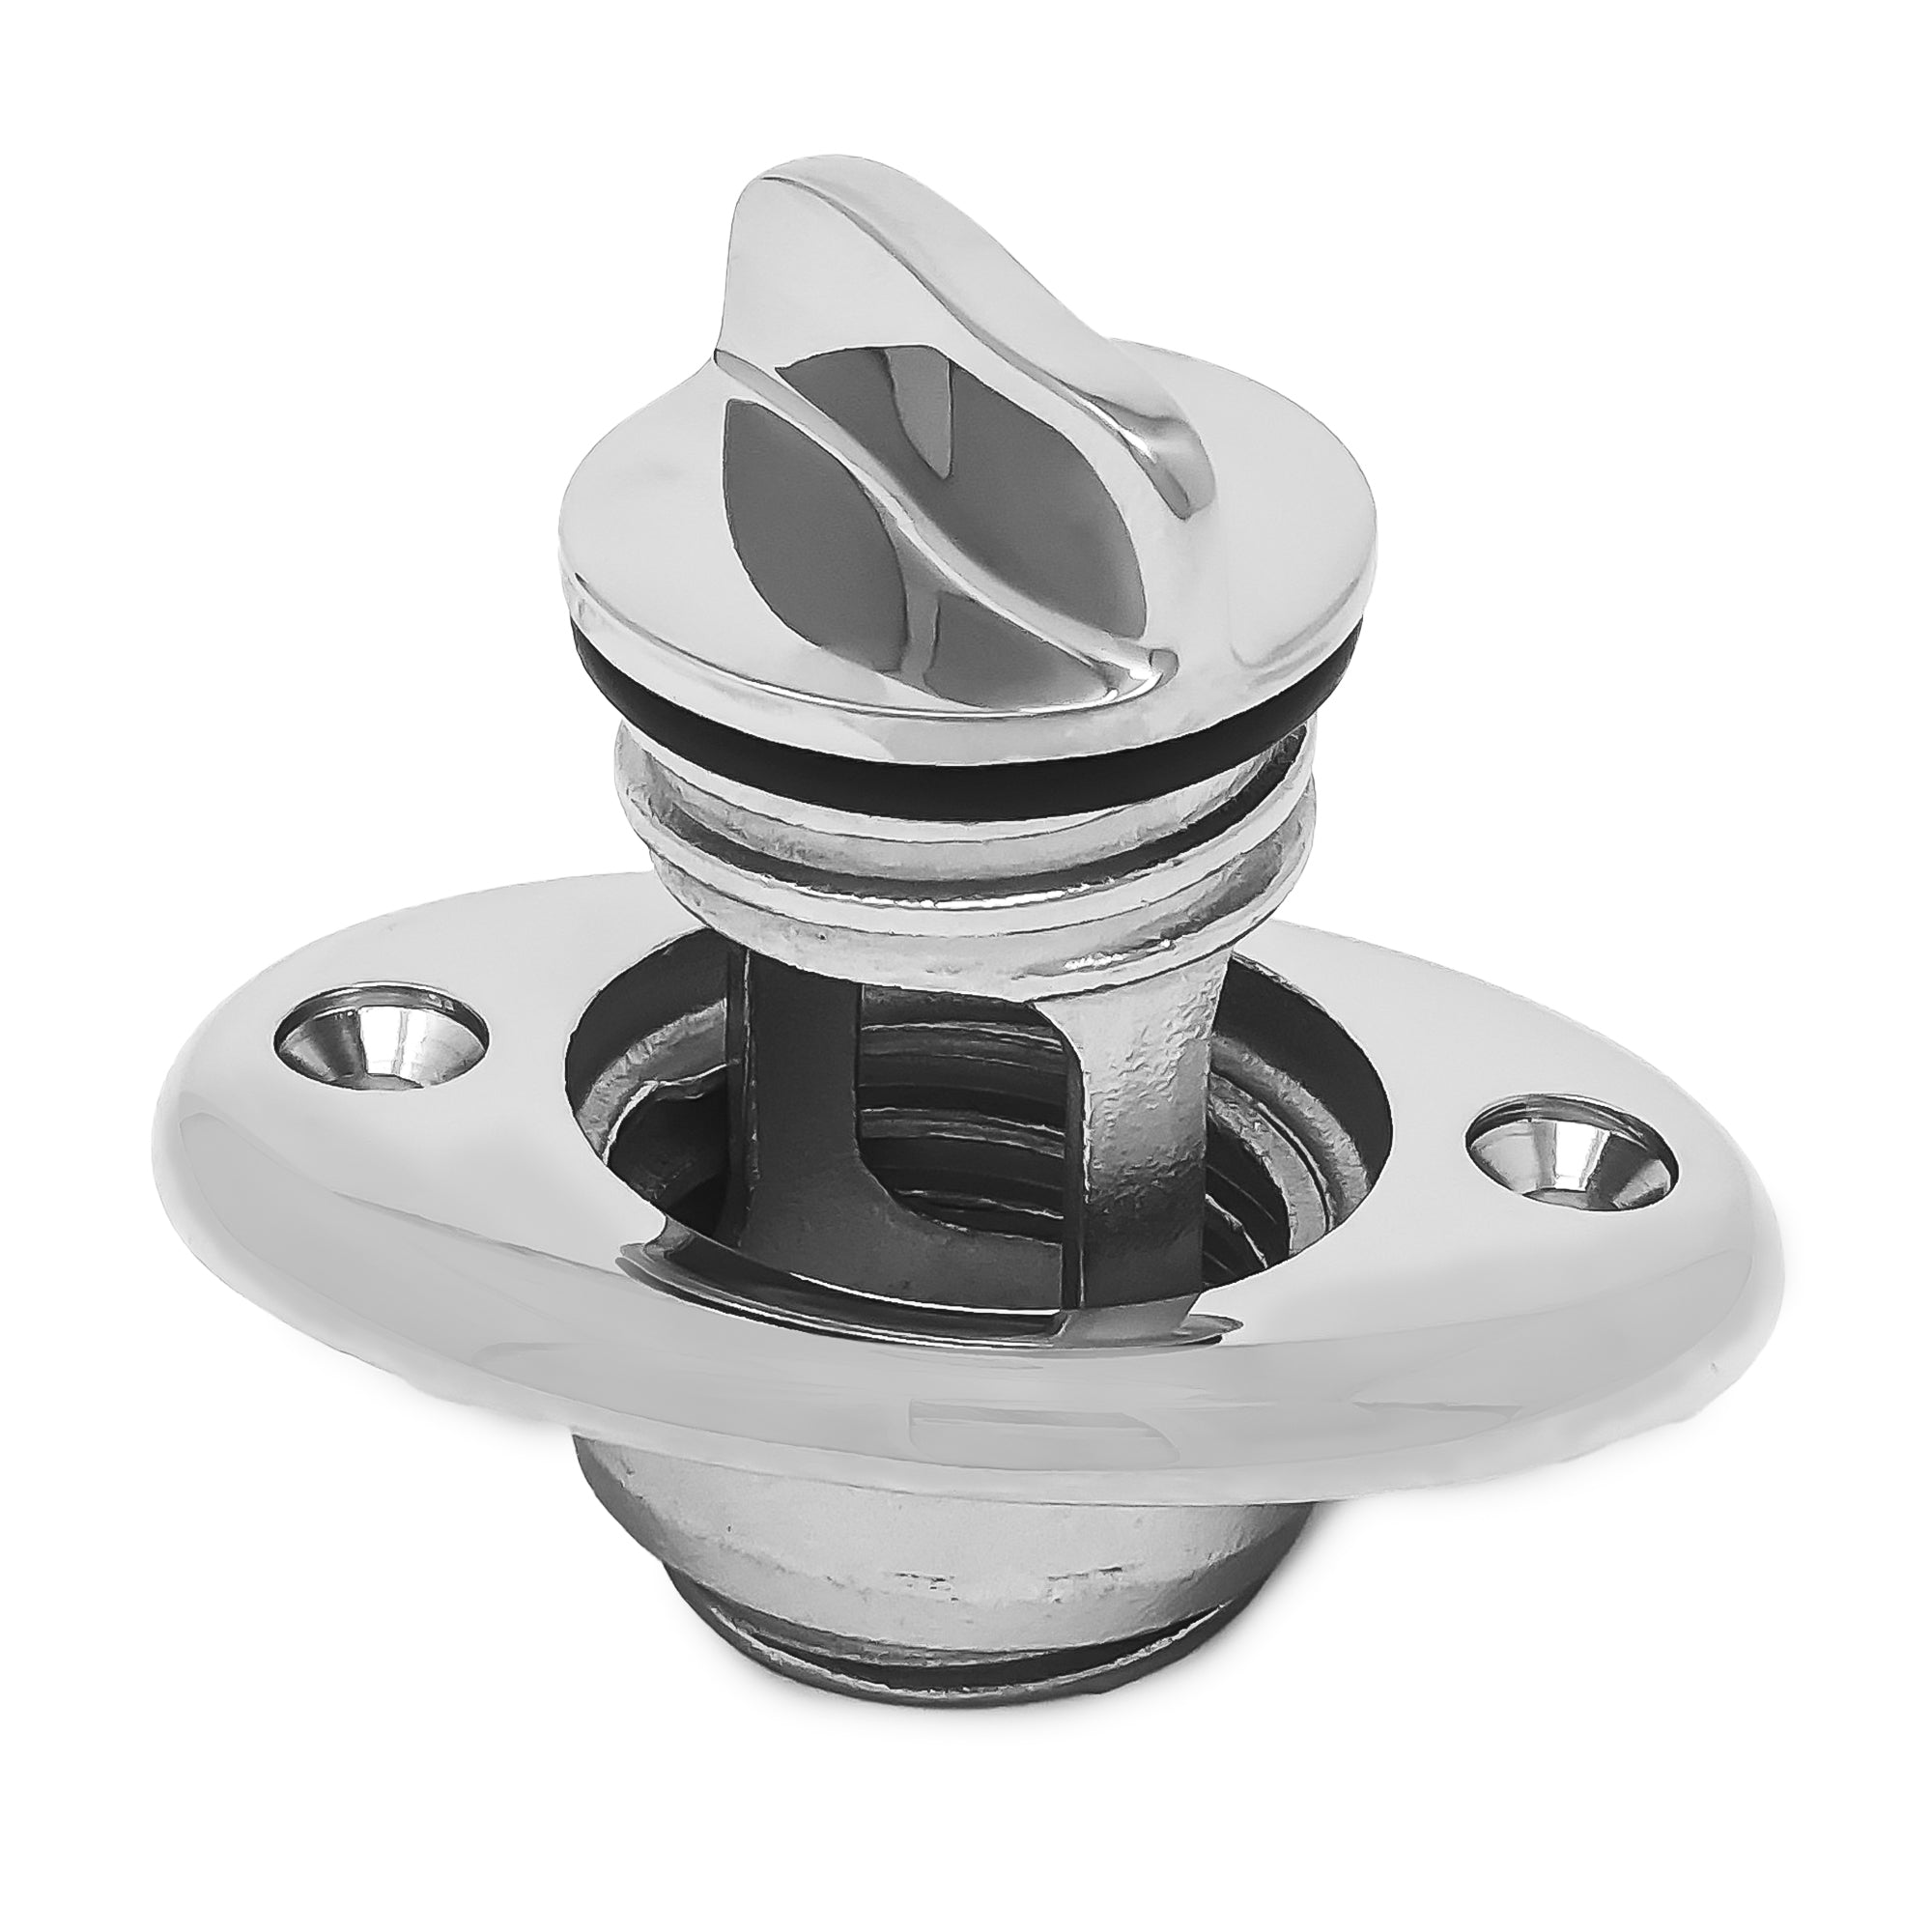 Garboard Drain Plug For 1-1/4" Transom Hole, Stainless Steel - FO2063